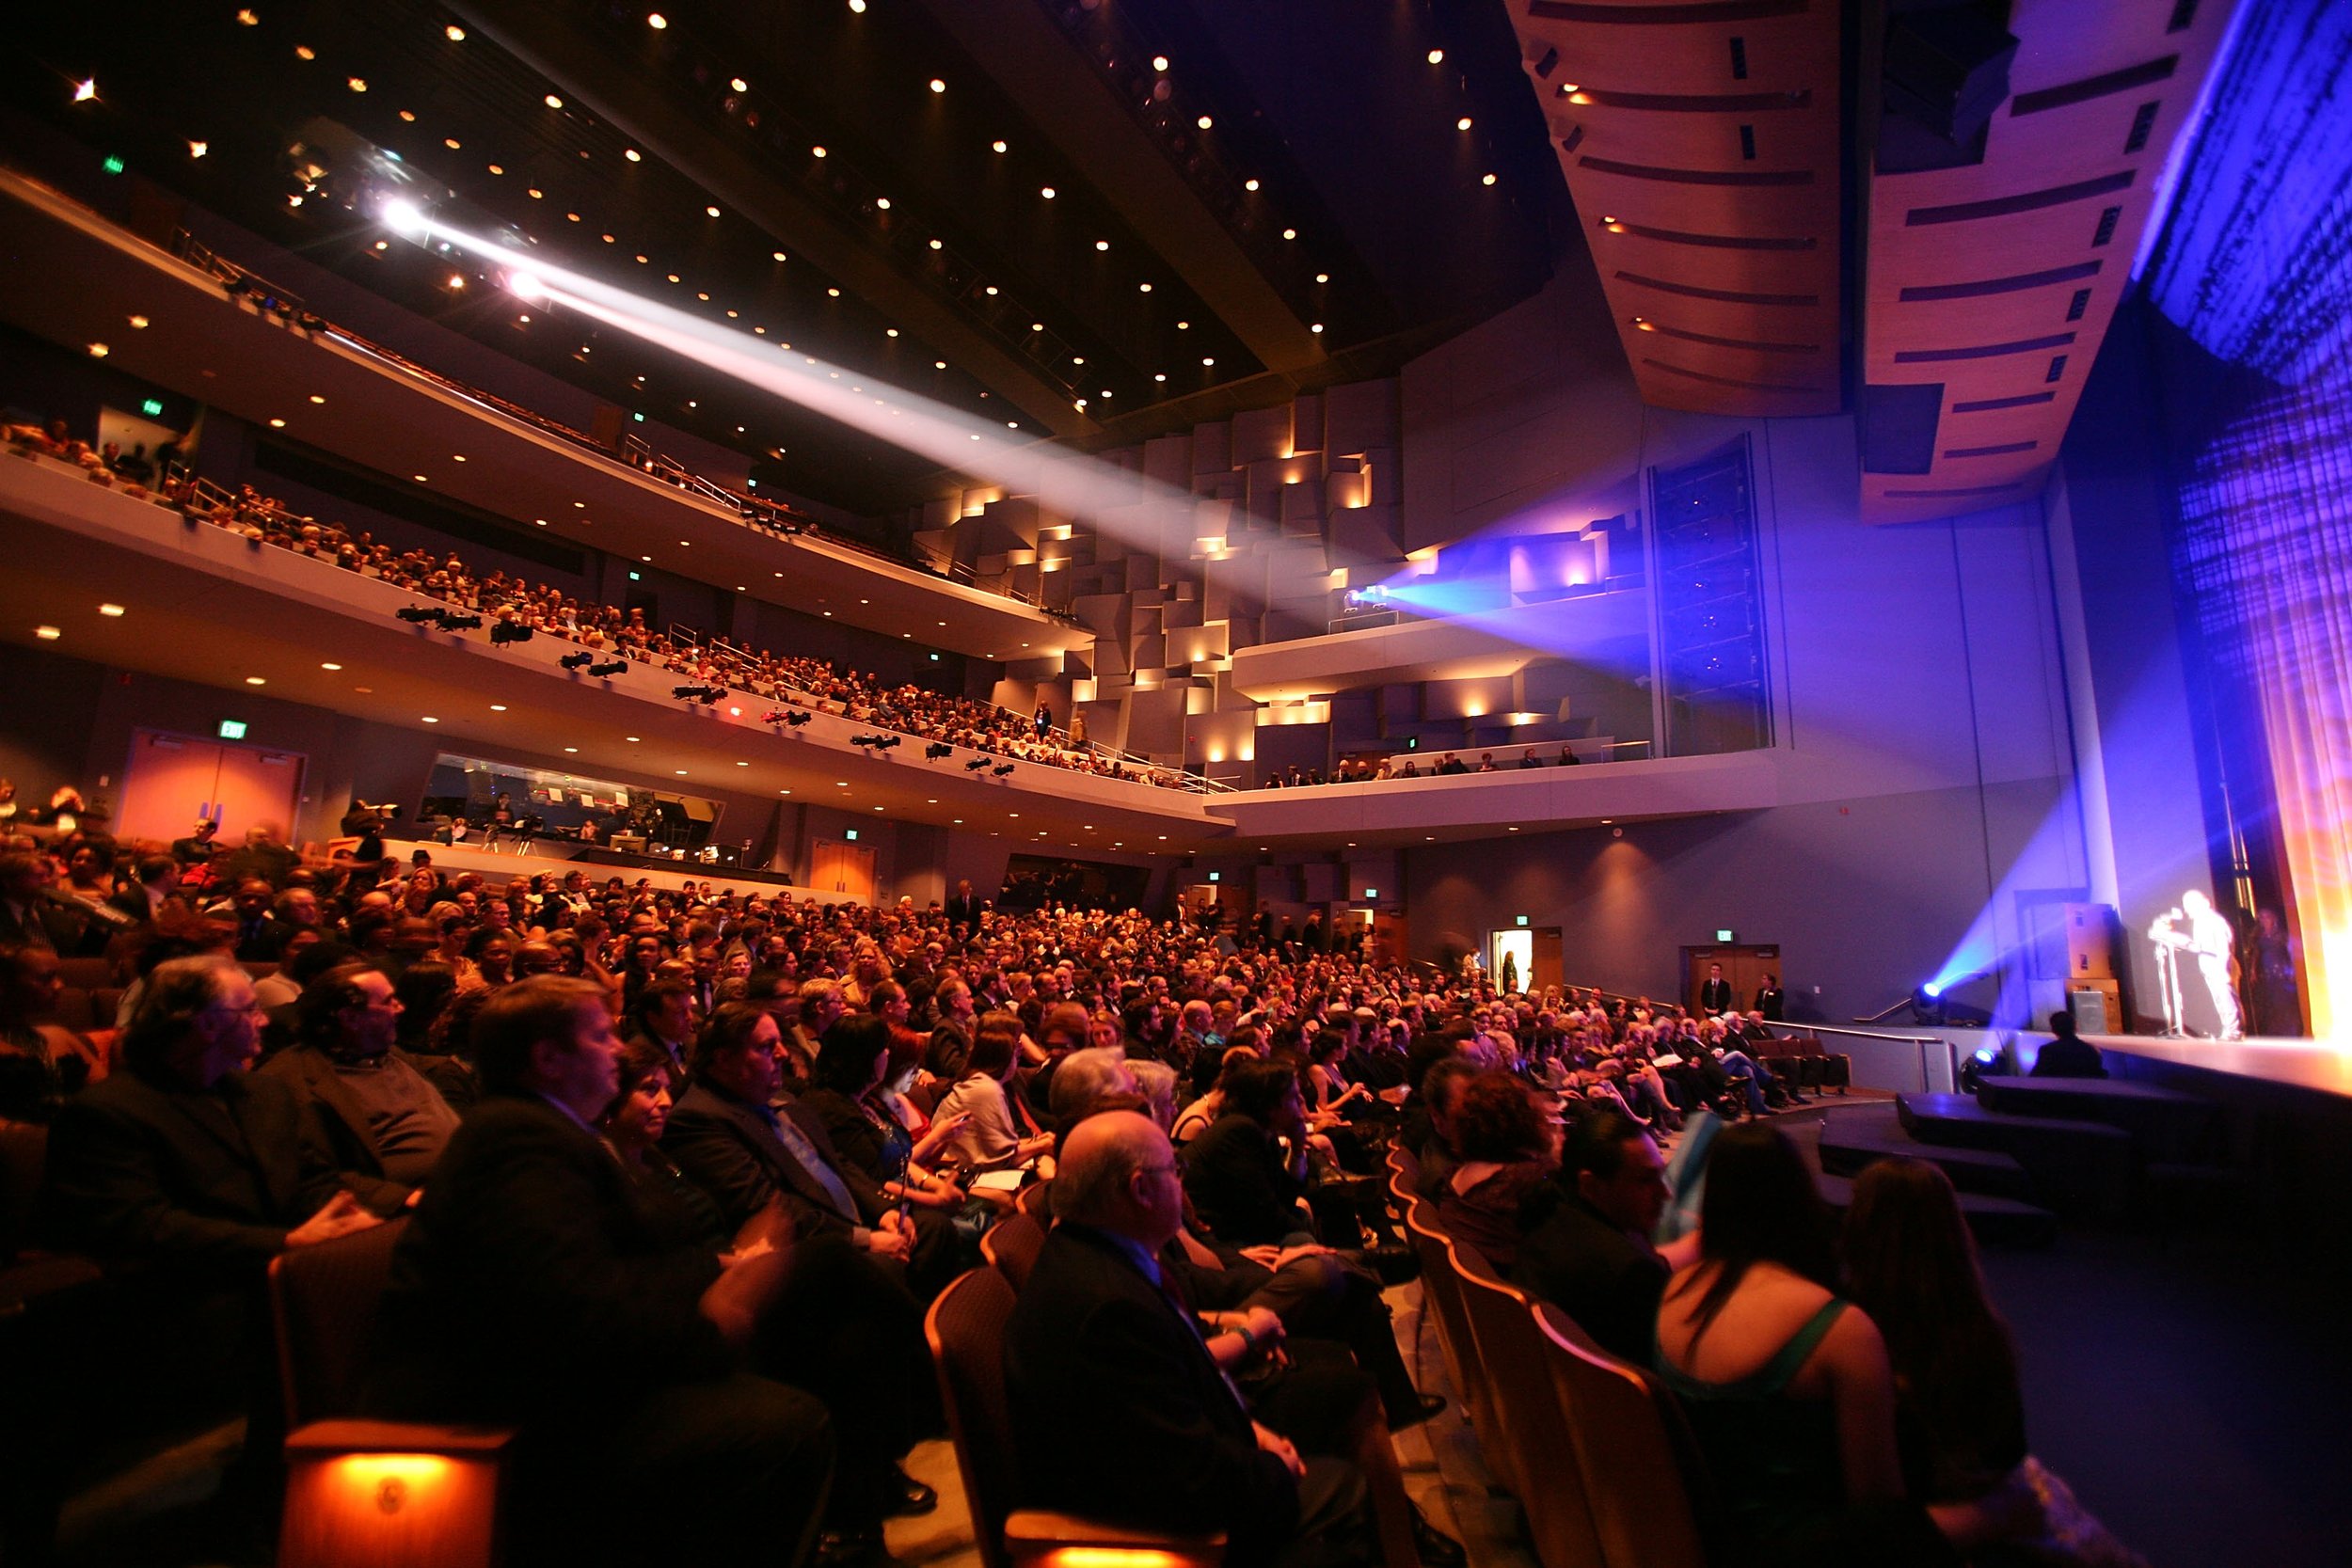 Bank of America Performing Arts Center Thousand Oaks